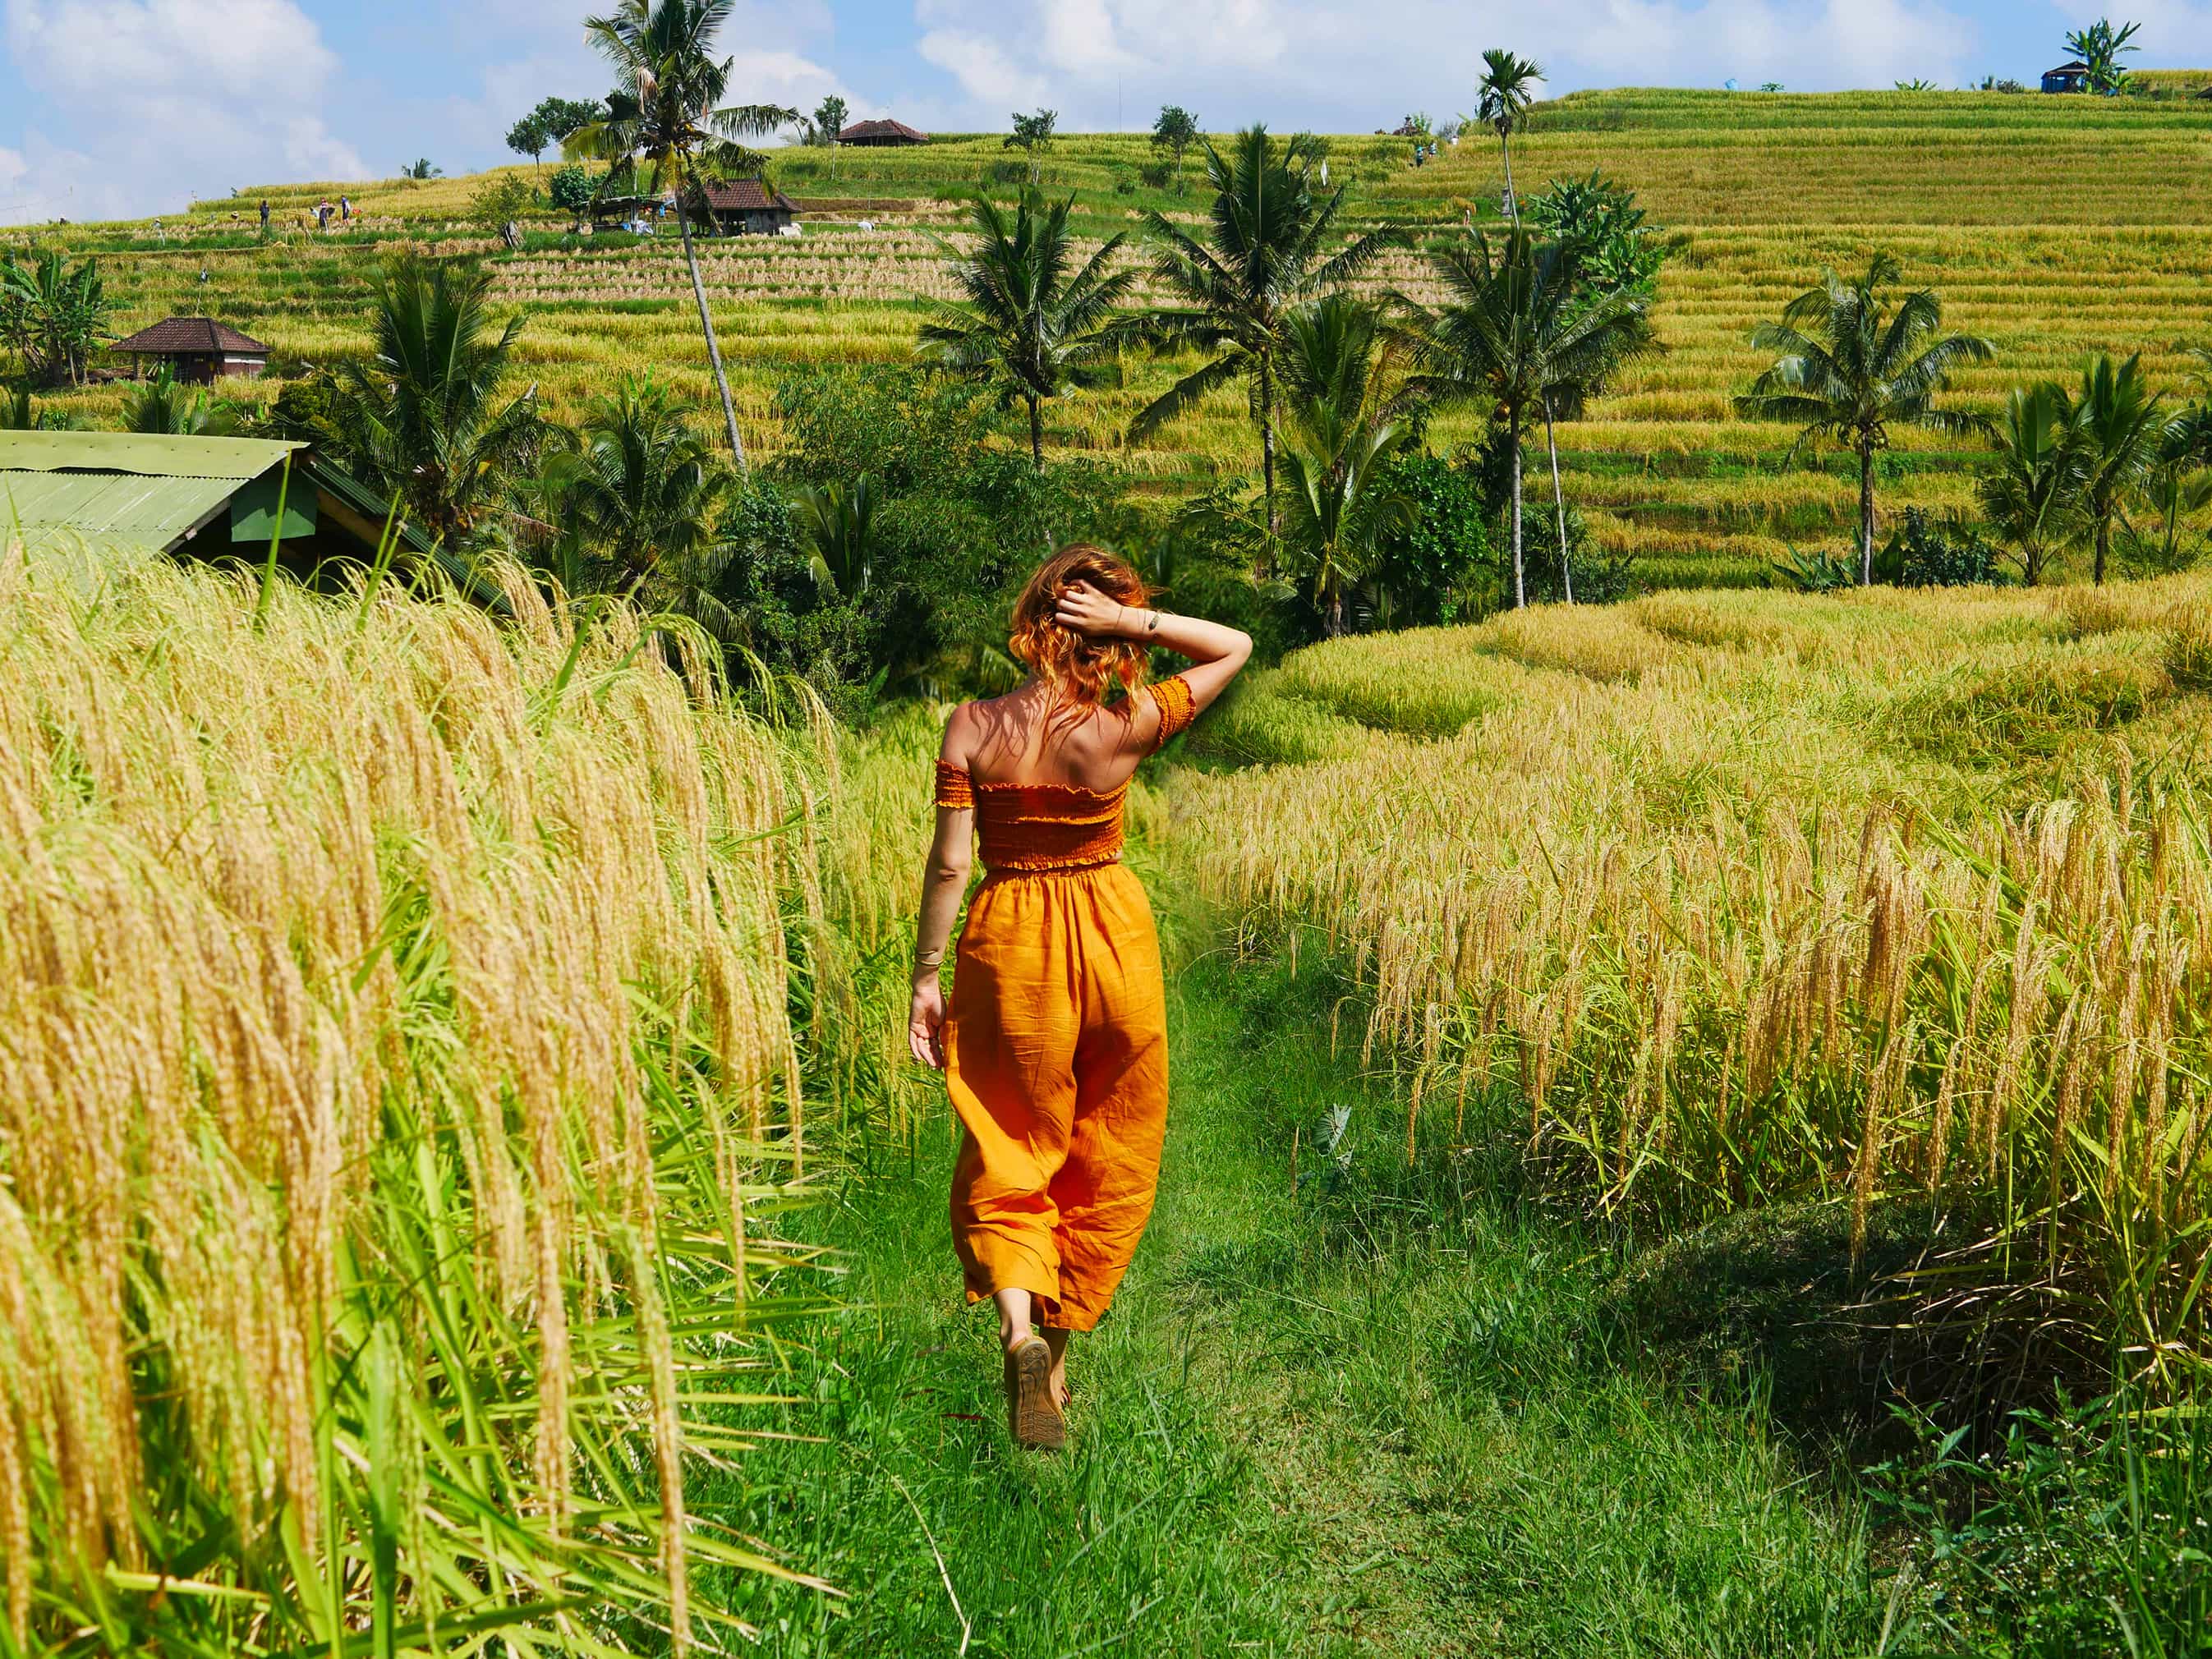 Lauren Ronquillo in Jatiluwih Rice Terraces, Bali Indonesia by Brianna D